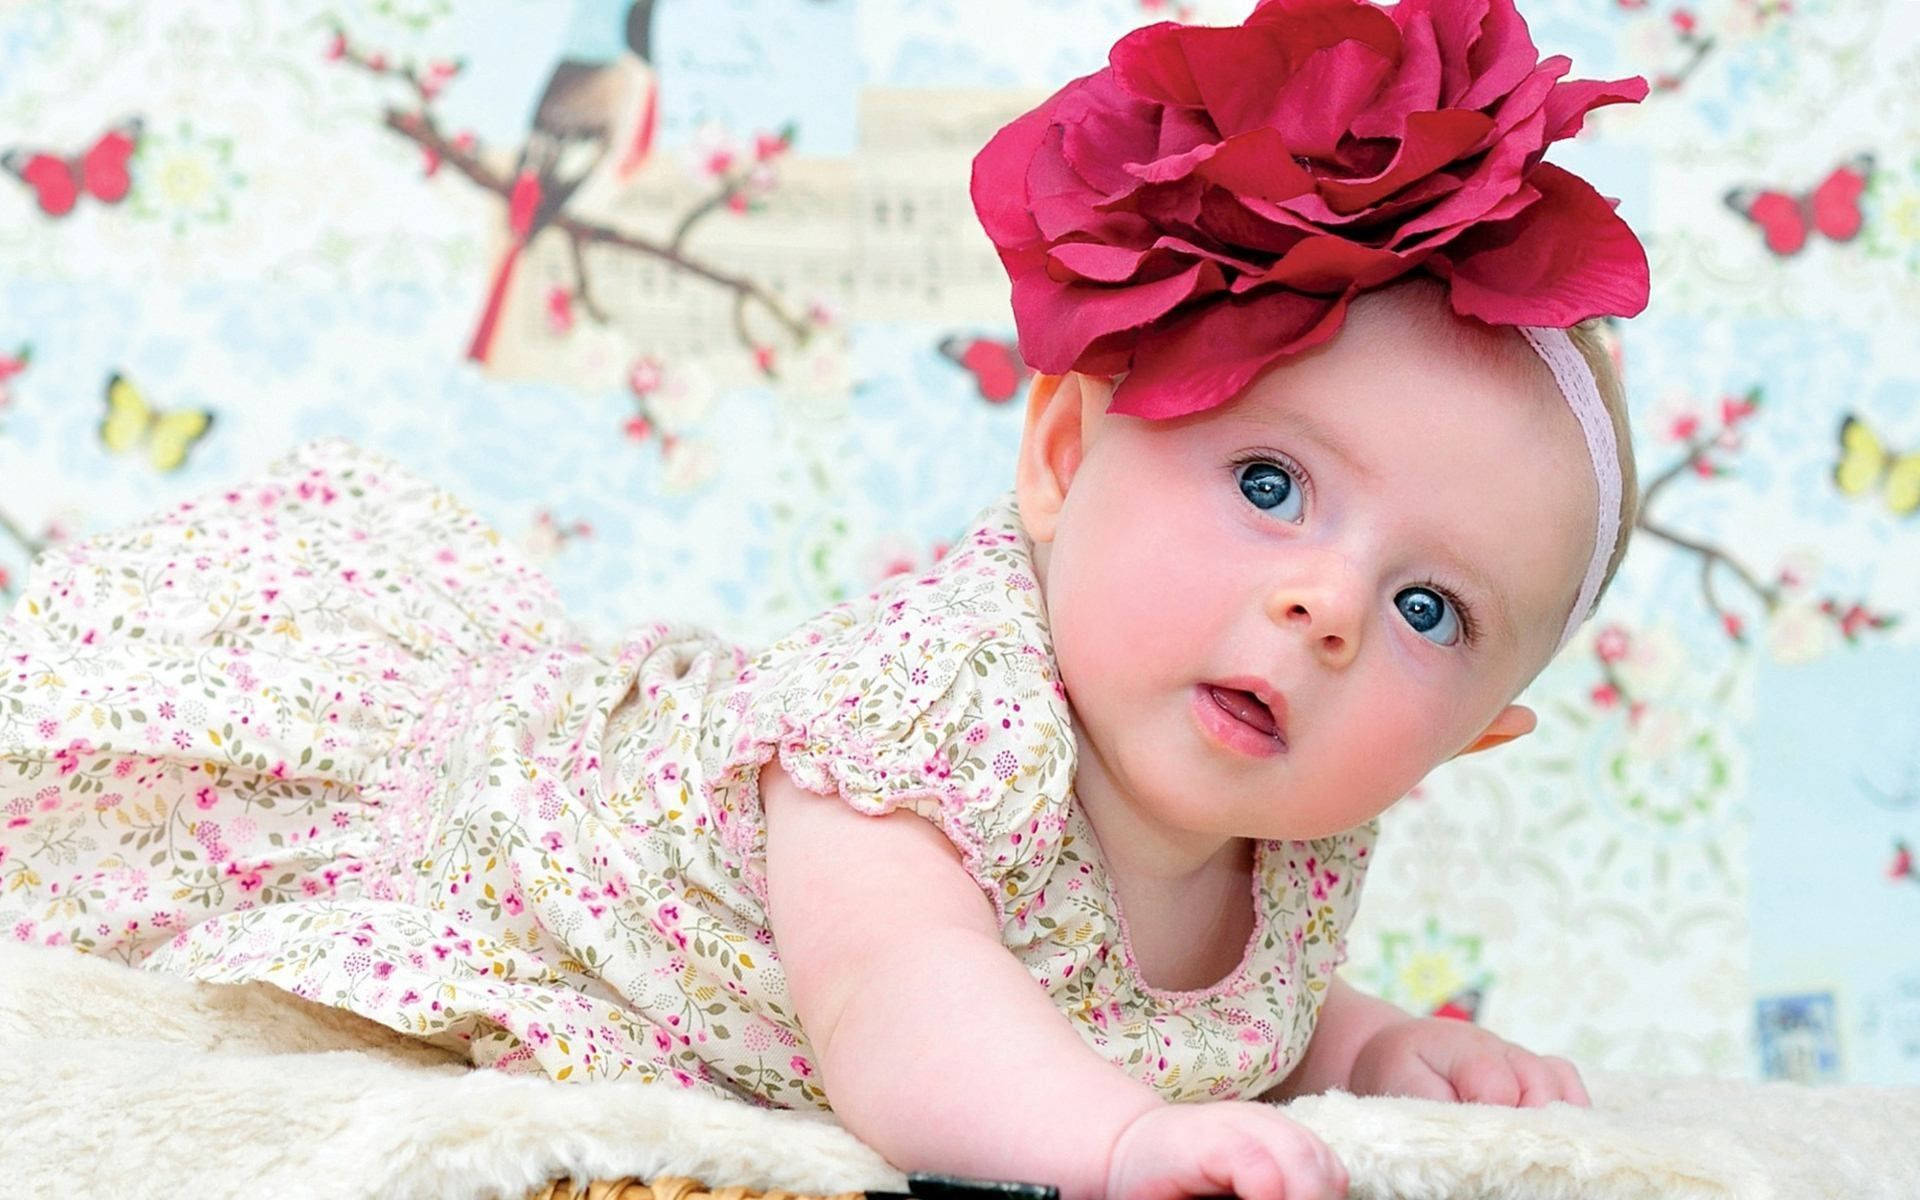 Free Baby Girl Wallpaper Downloads, [200+] Baby Girl Wallpapers for FREE |  